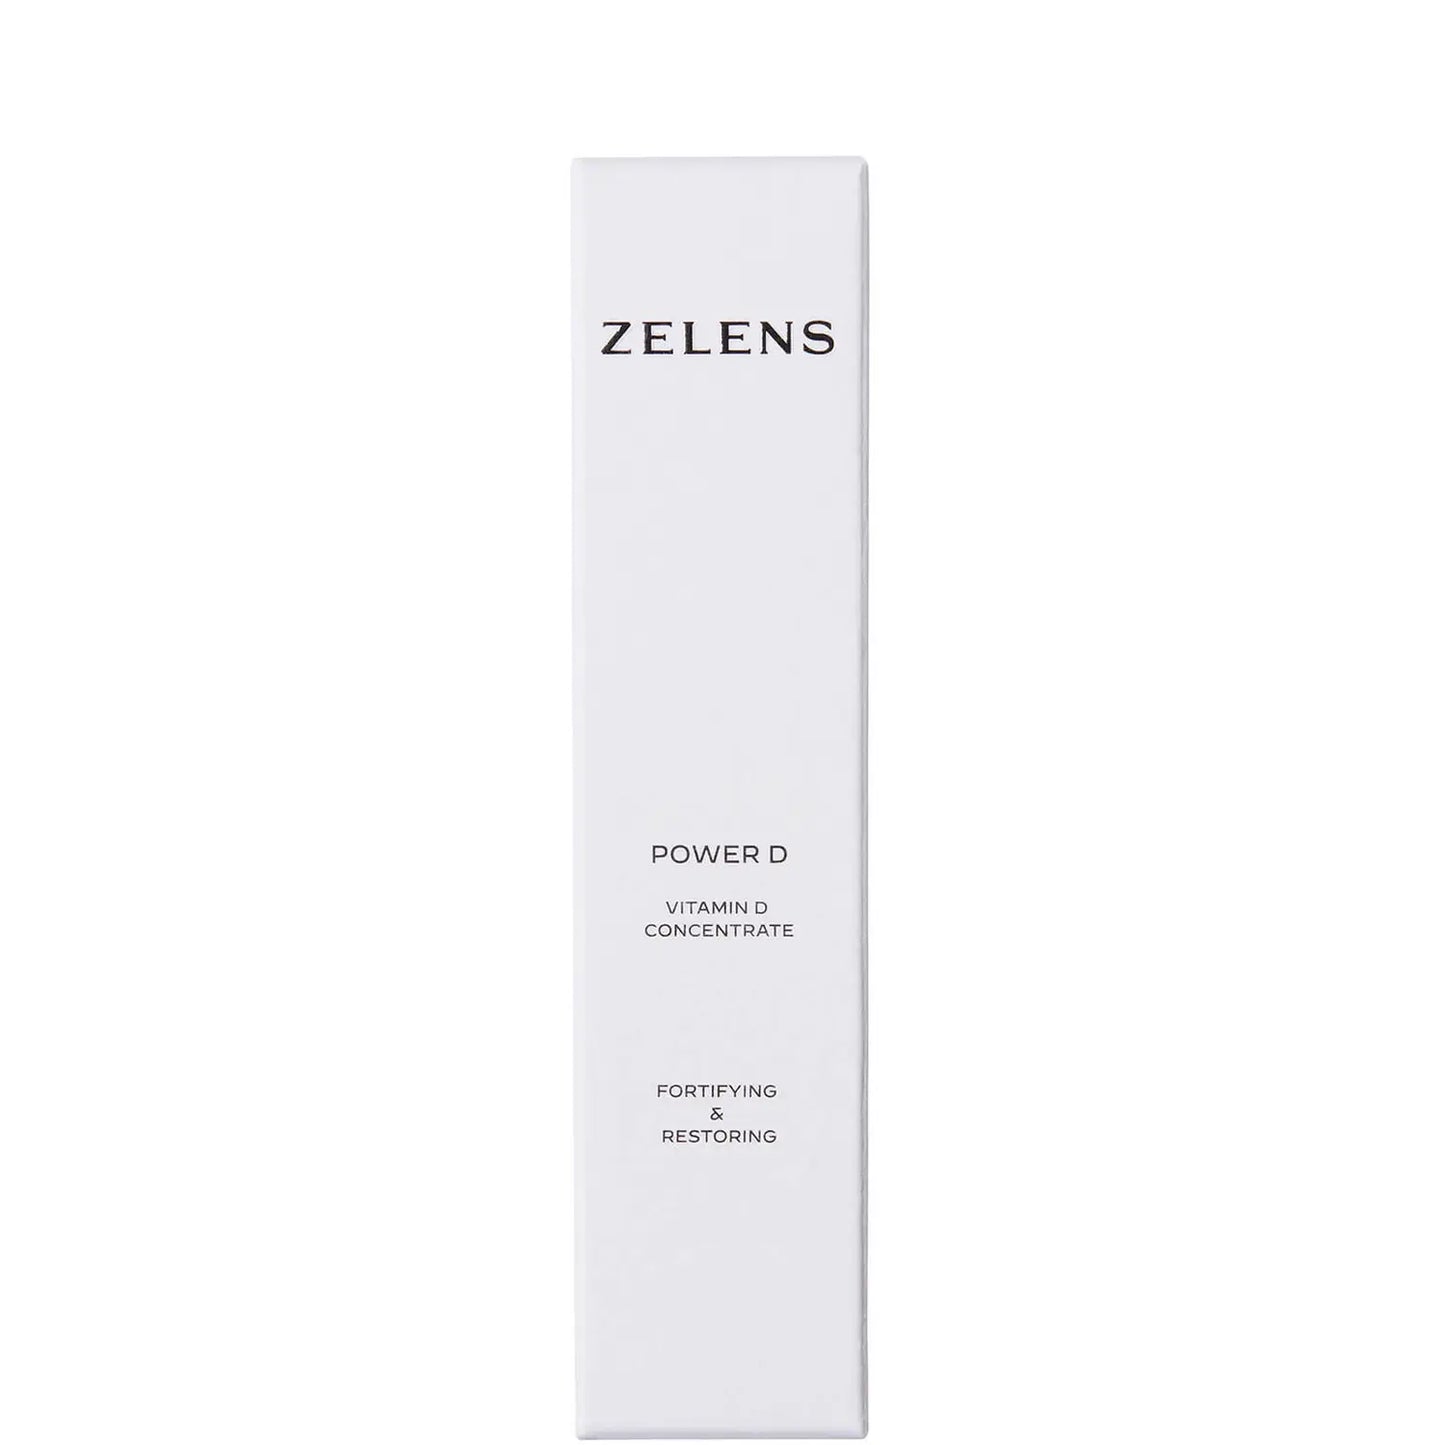 Zelens Power D Vitamin D Concentrate Fortifying & Restoring 10 ml